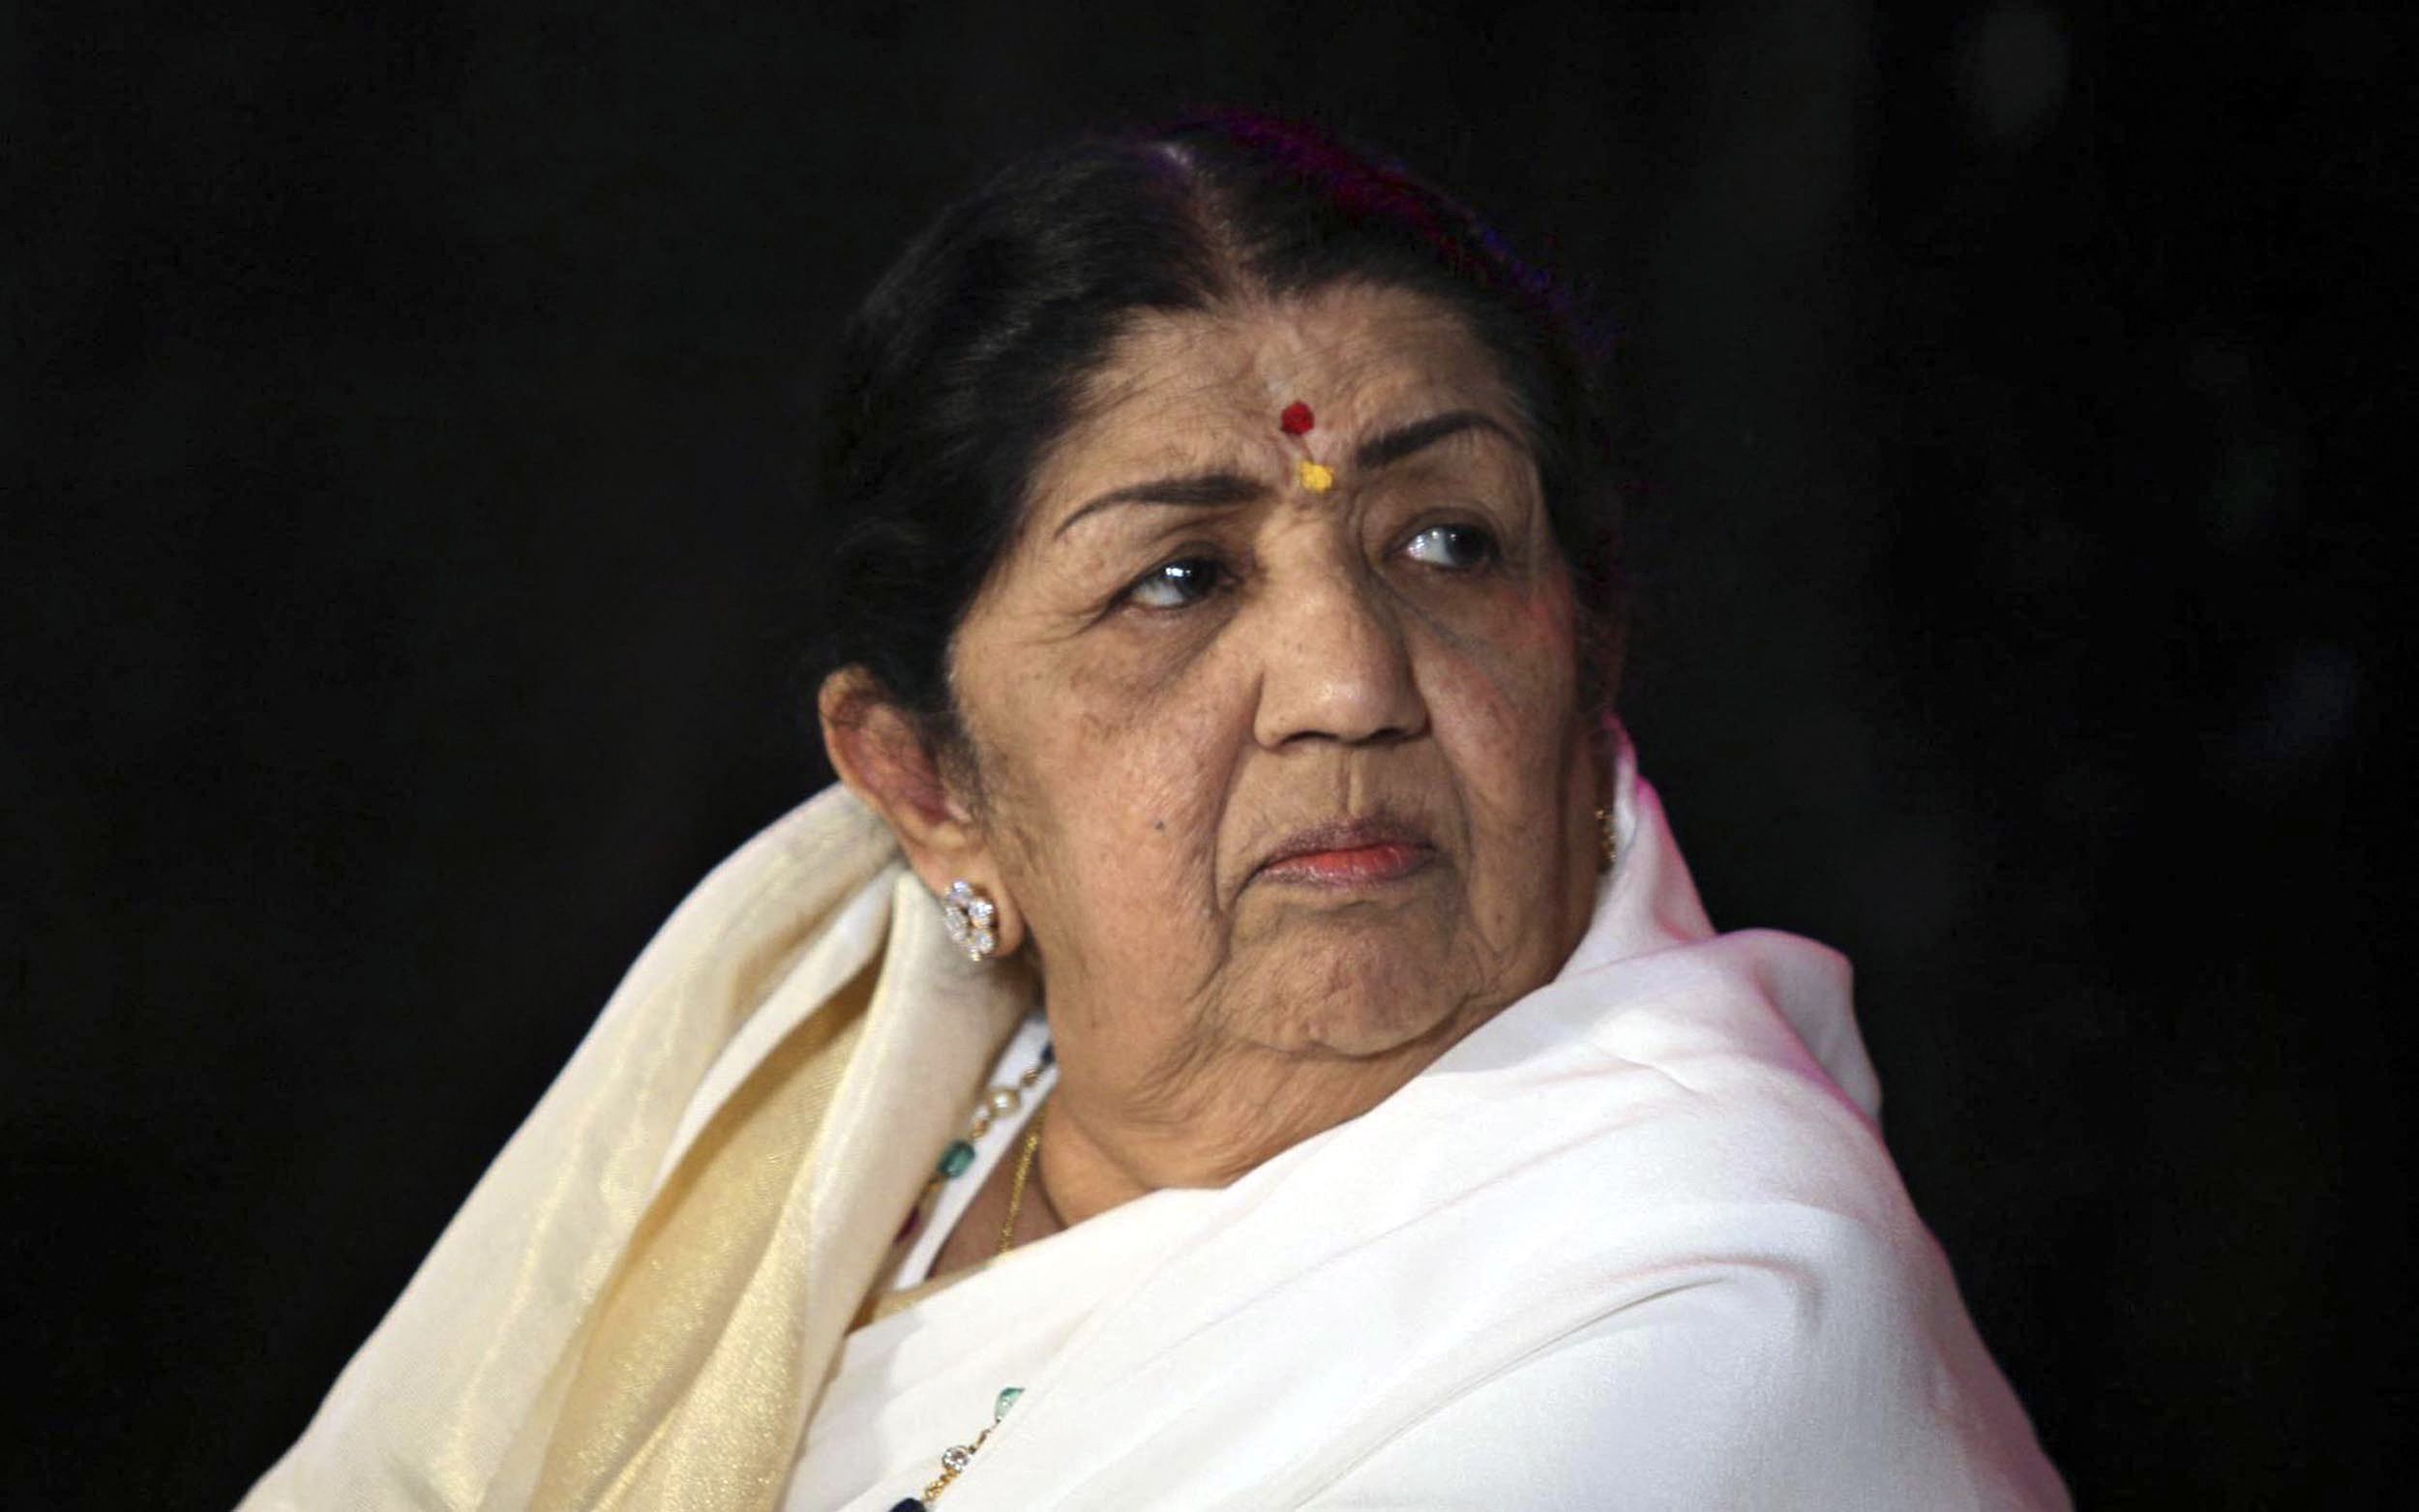 West Bengal CM Announces Half-Day Holiday To Mourn Lata Mangeshkar's Death